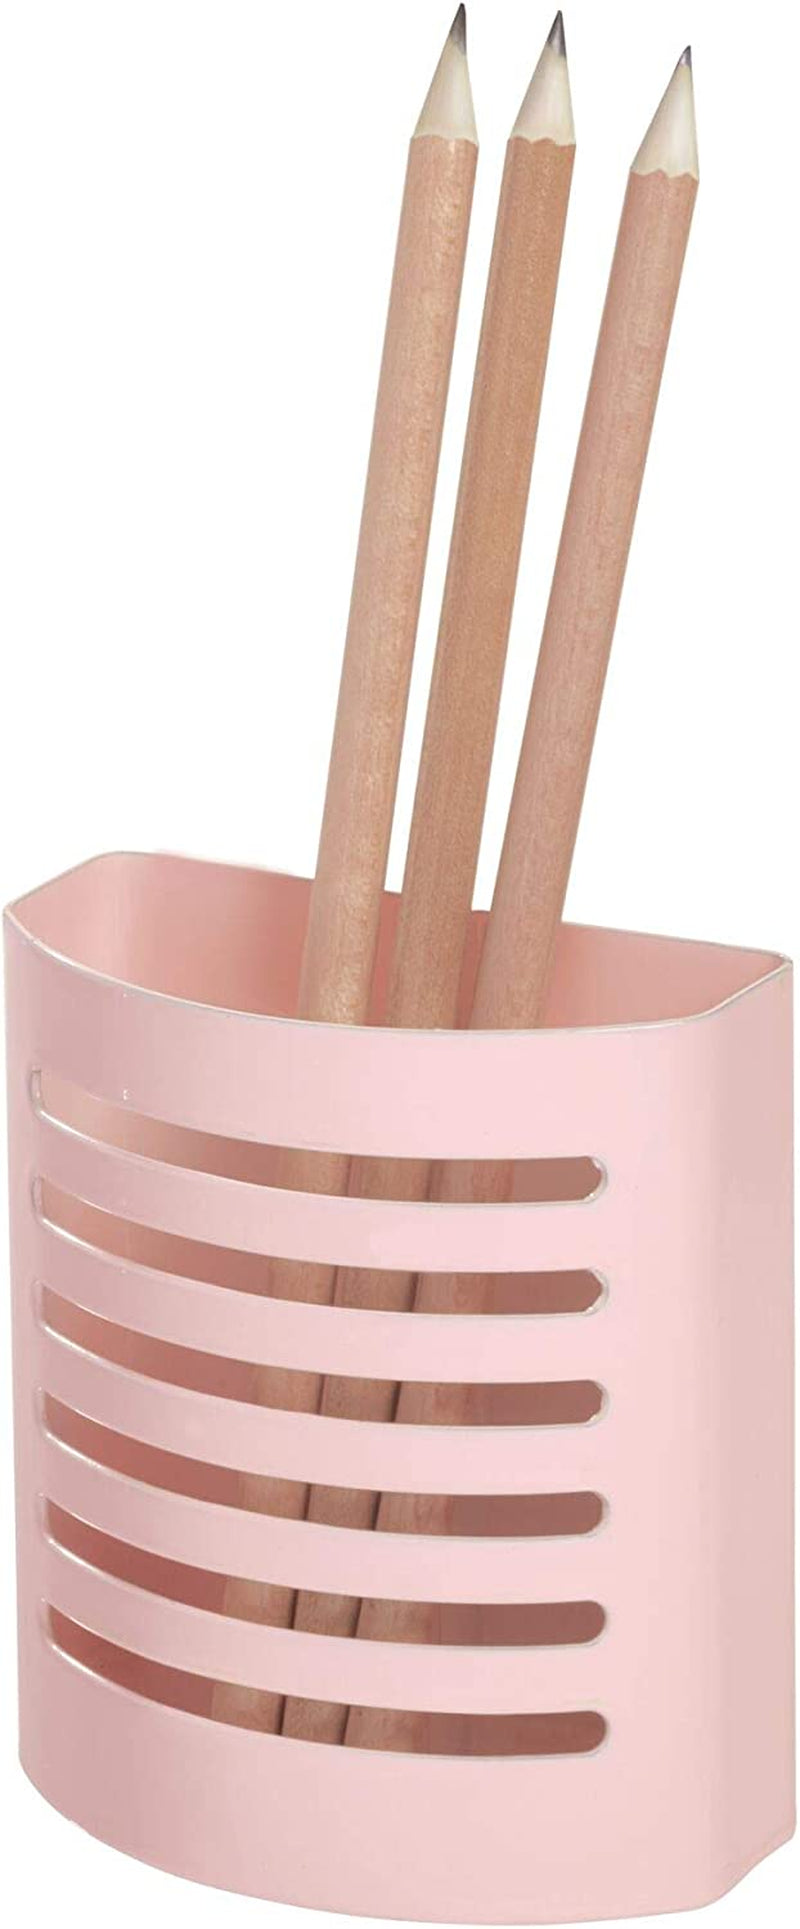 Idesign 85176 Magnetic Modern Pen and Pencil Holder, Writing Utensil Storage Organizer for Kitchen, Locker, Home, or Office, Set of 1, Mint Blue Home & Garden > Household Supplies > Storage & Organization iDesign Blush Pink Pencil Cup 